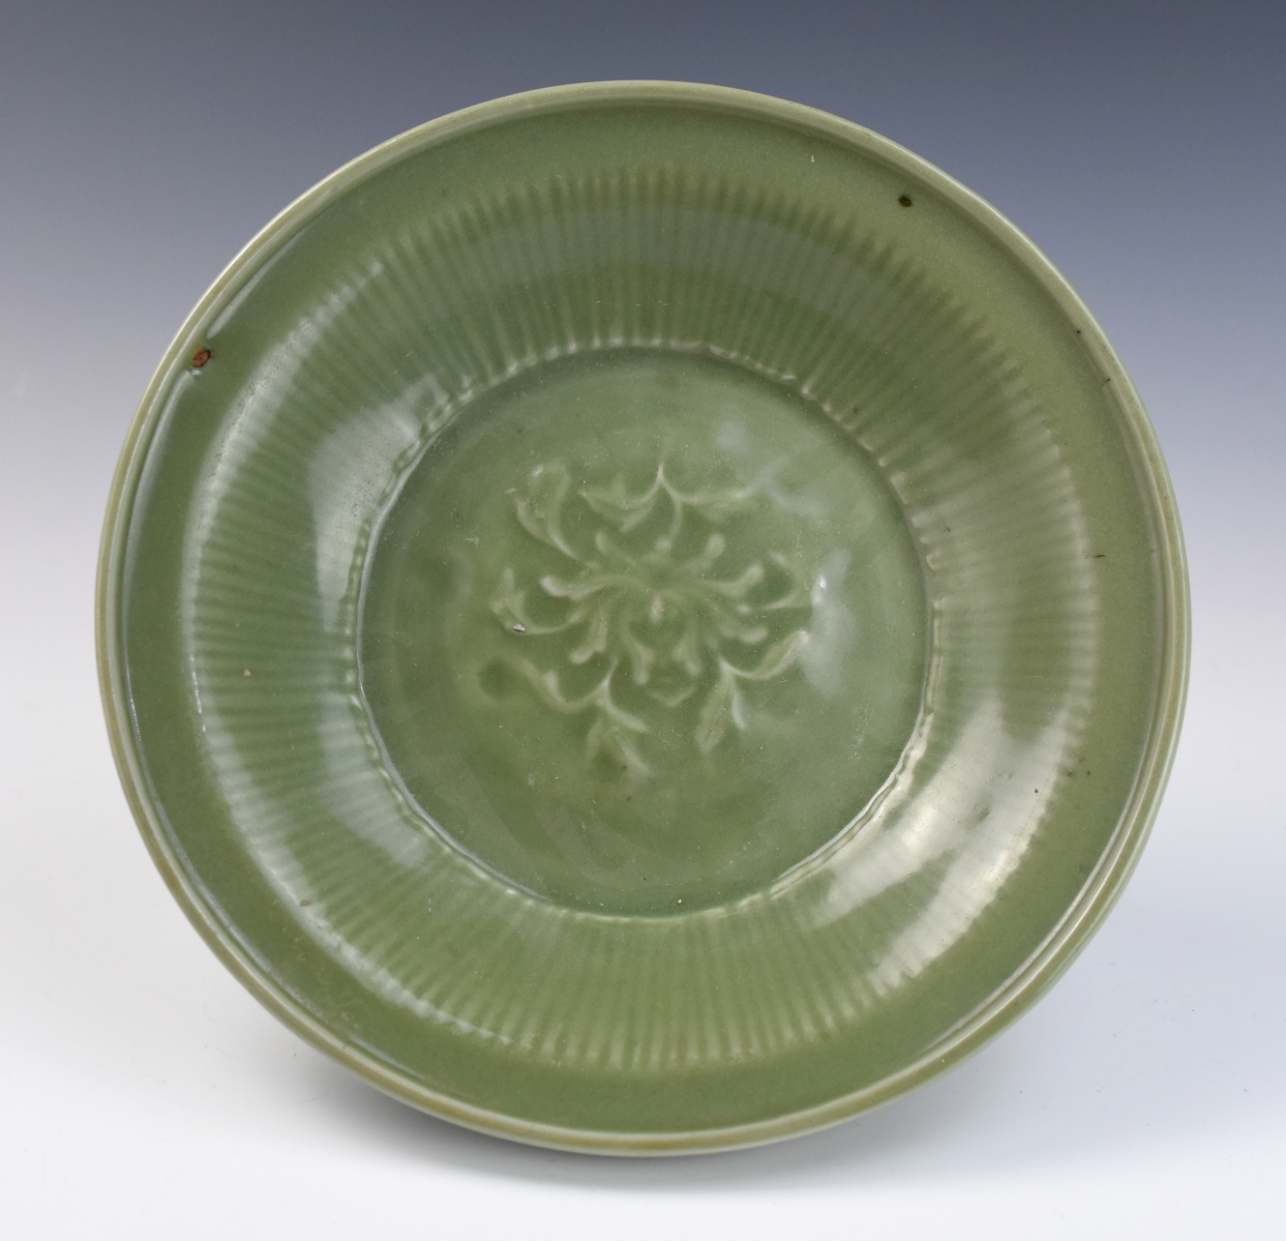 CHINESE LONGQUAN WARE PLATE, MING